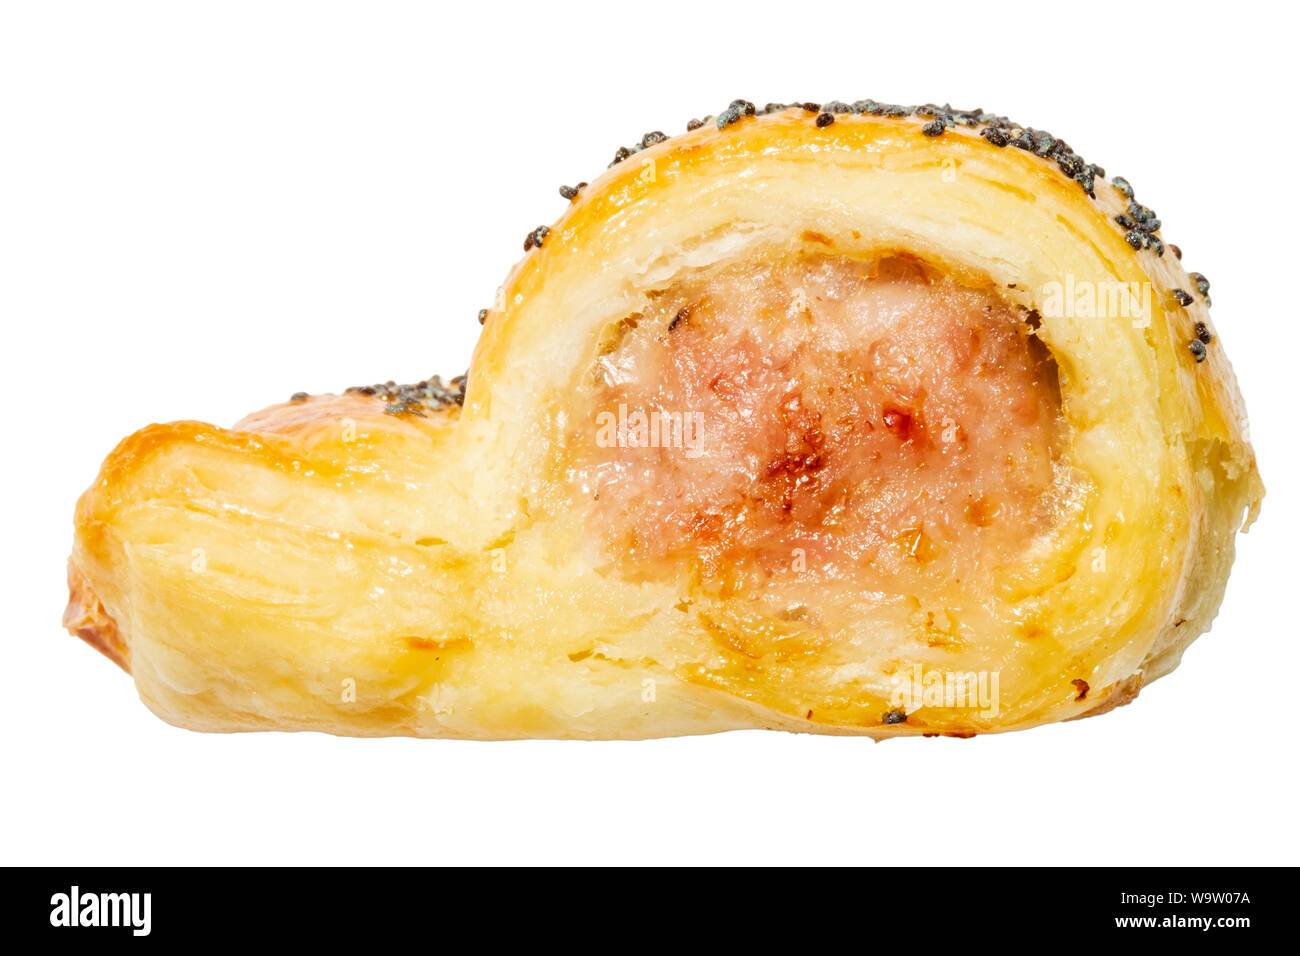 Sausage roll with poppy seeds, side view and cut out or isolated on a white background, UK. Stock Photo